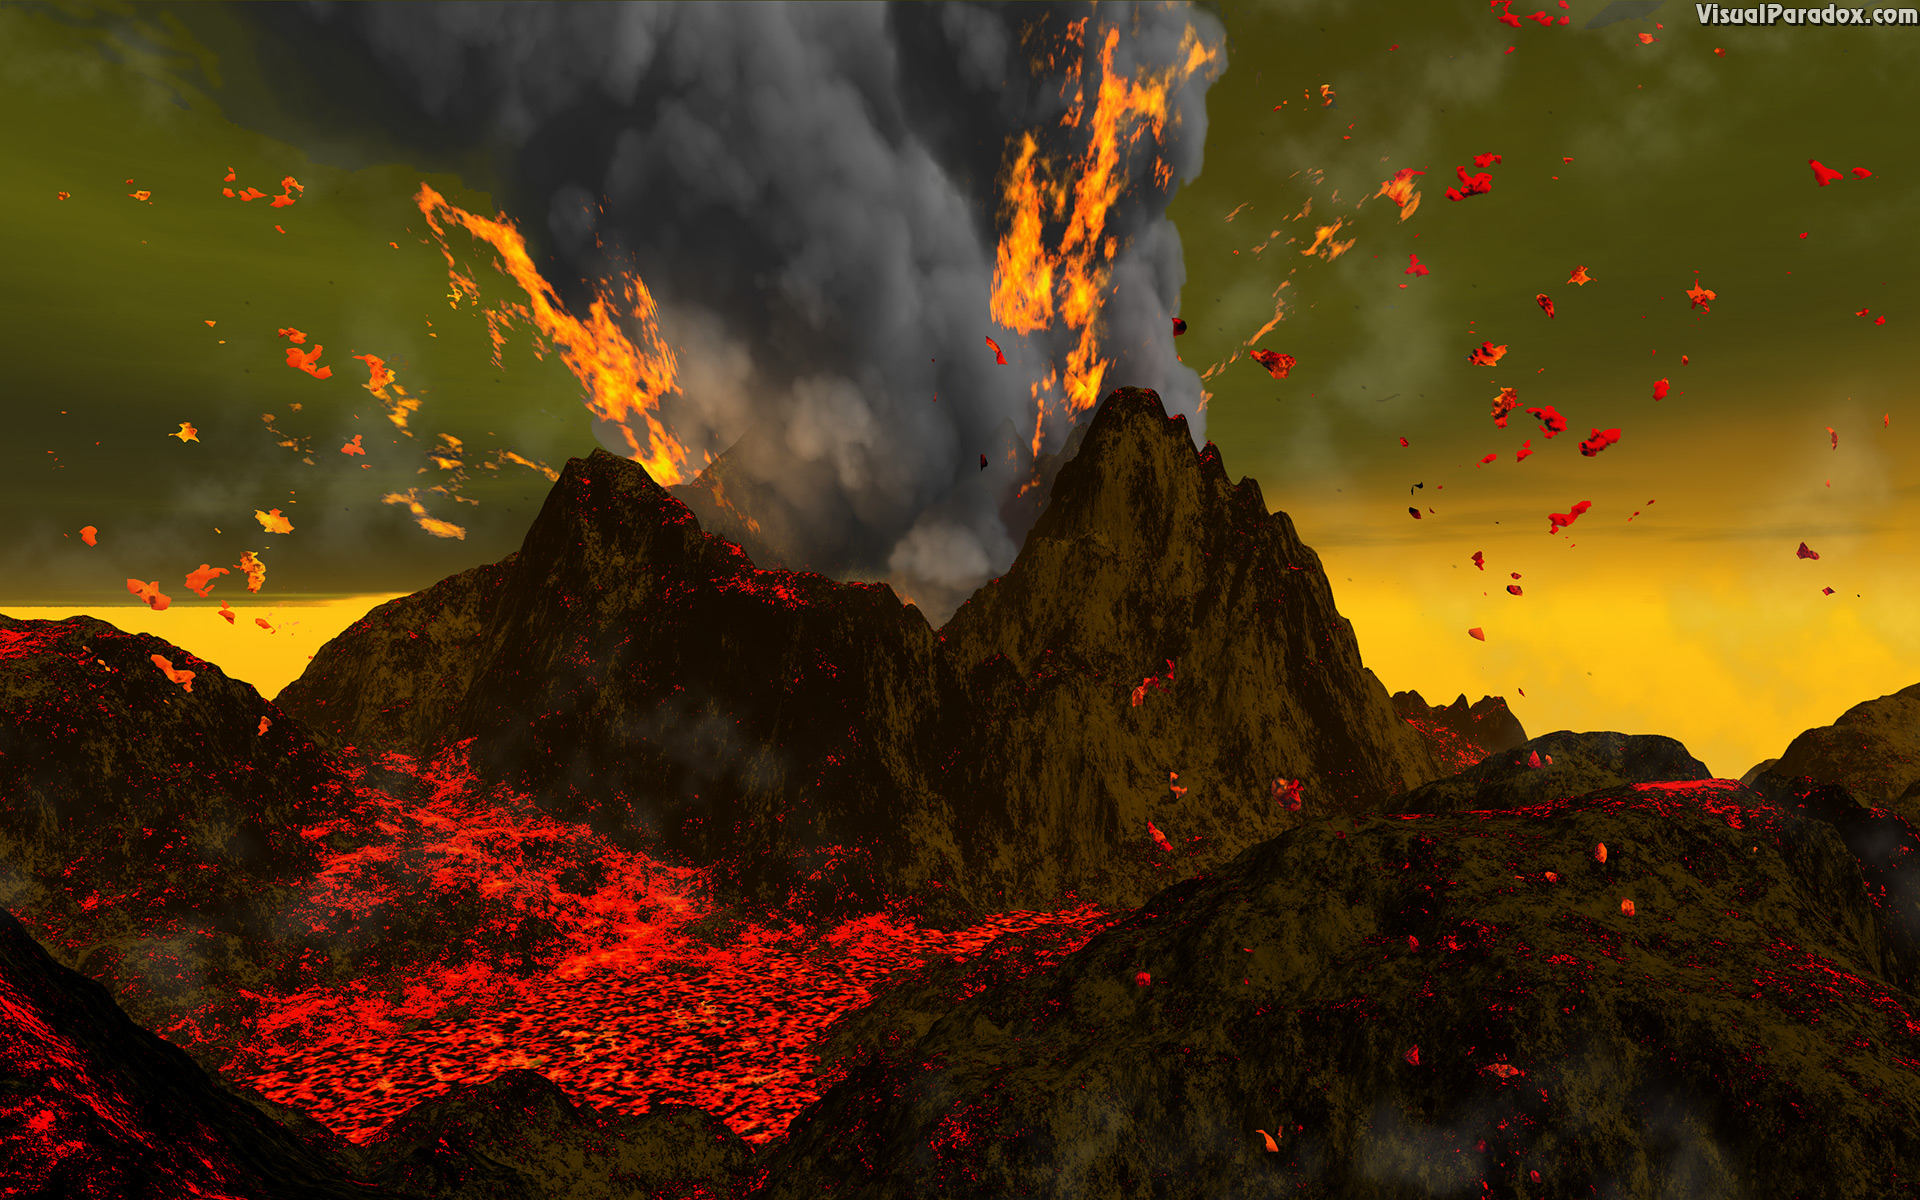 eruption, explosion, hell, lava, red, volcanic, volcano, mountain, magma, ash, smoke, fire, active, volcanoes, erupt, volcanology, 3d, wallpaper